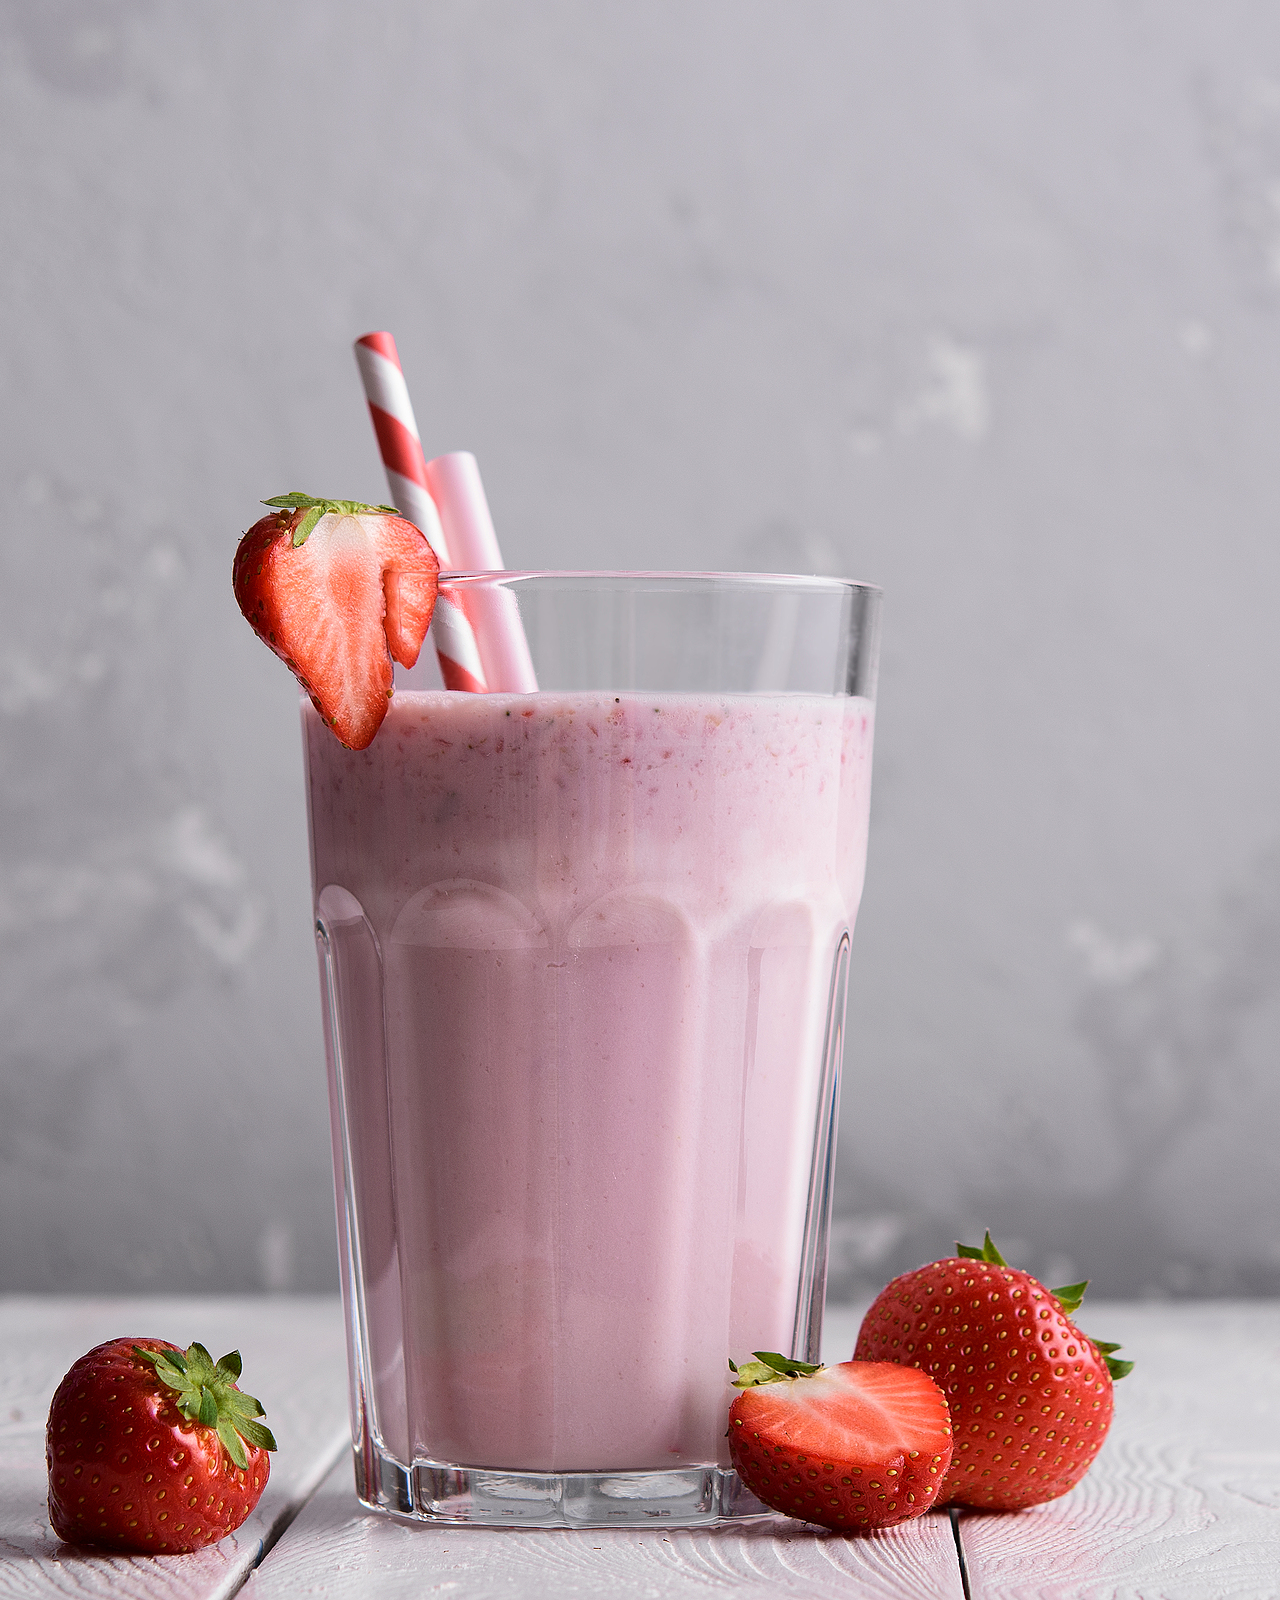 easy low-carb lunches-smoothie